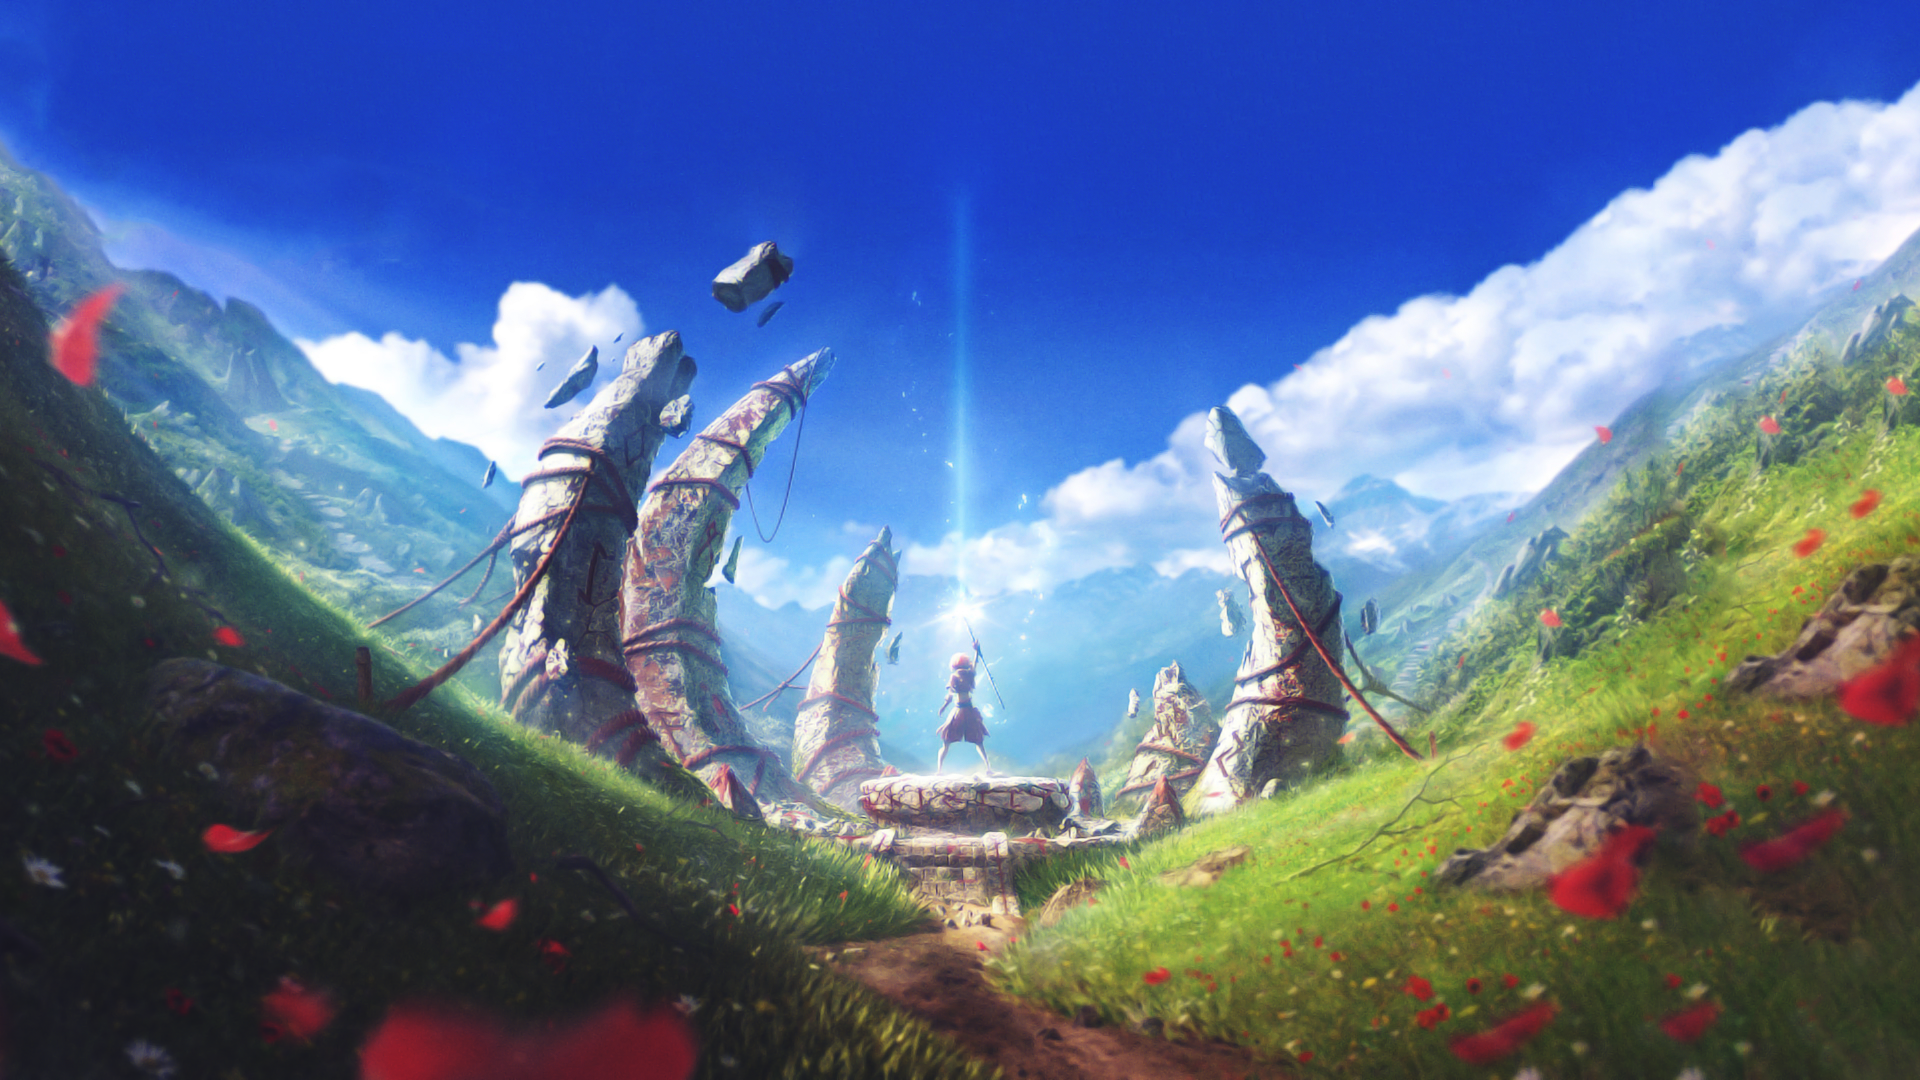 General 1920x1080 digital art flowers clouds temple staff mountains